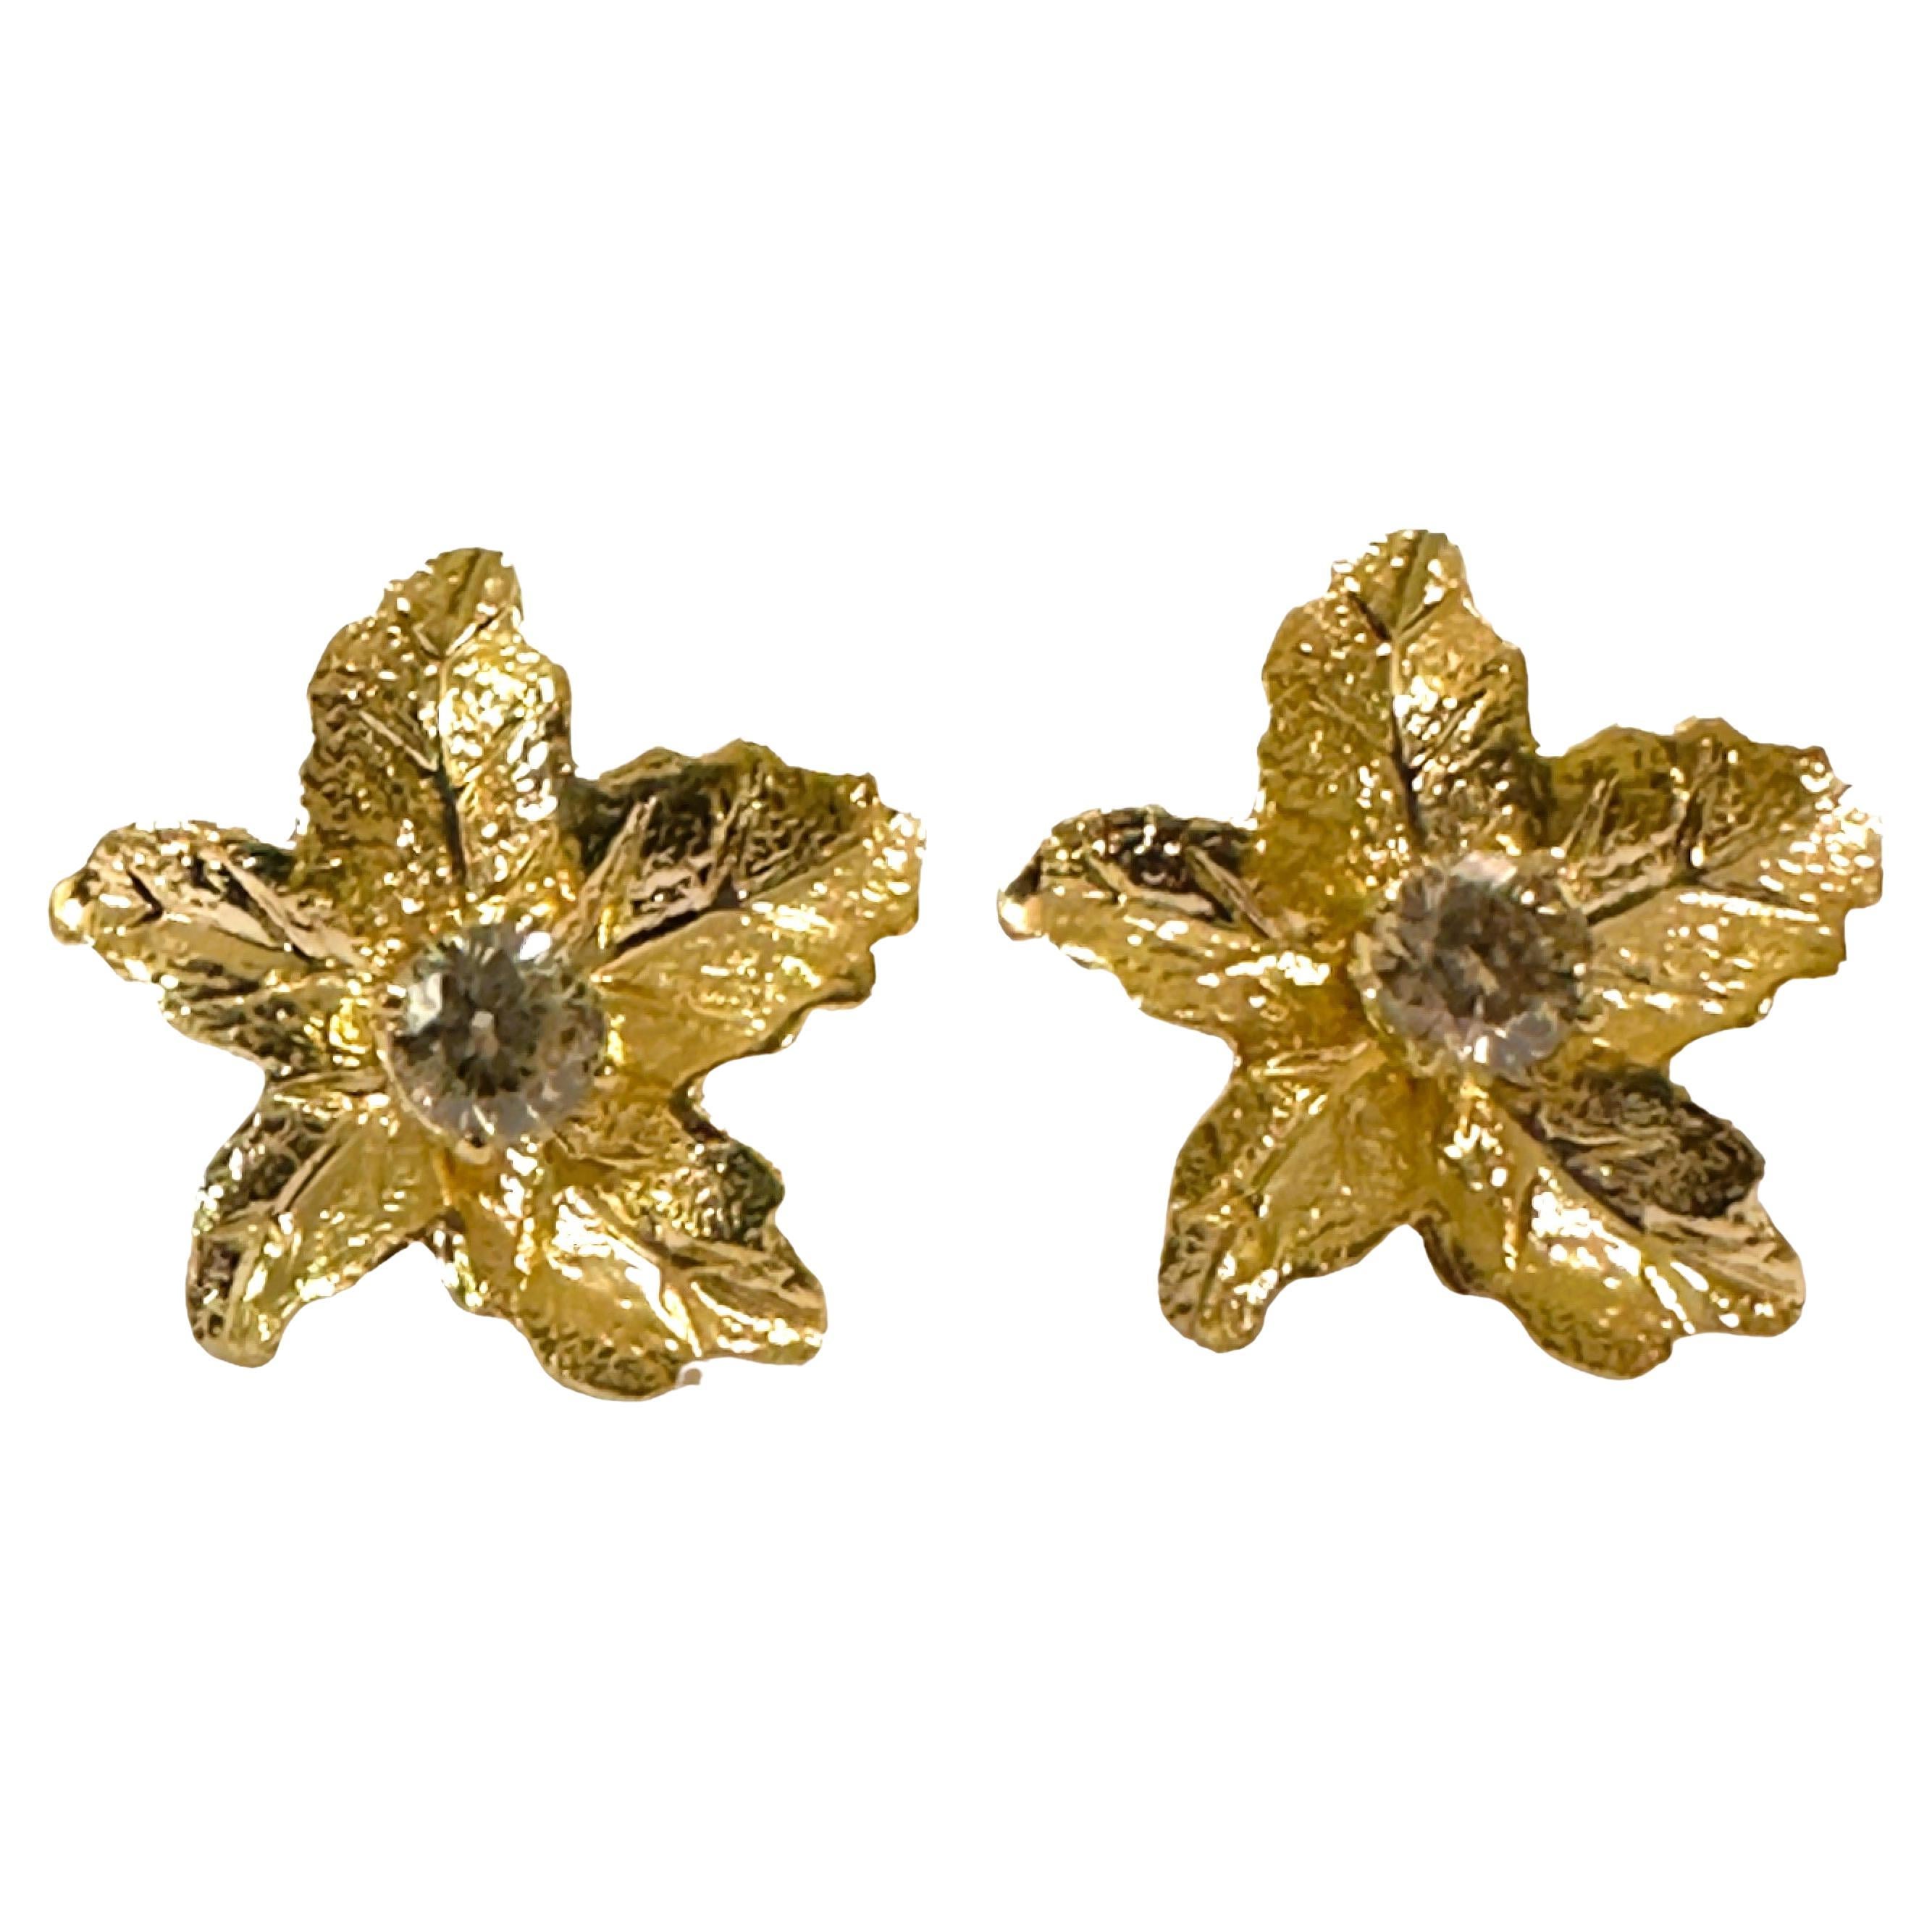 Diamond Studs with 14k Yellow Gold Leaf Jackets Earrings With Appraisal